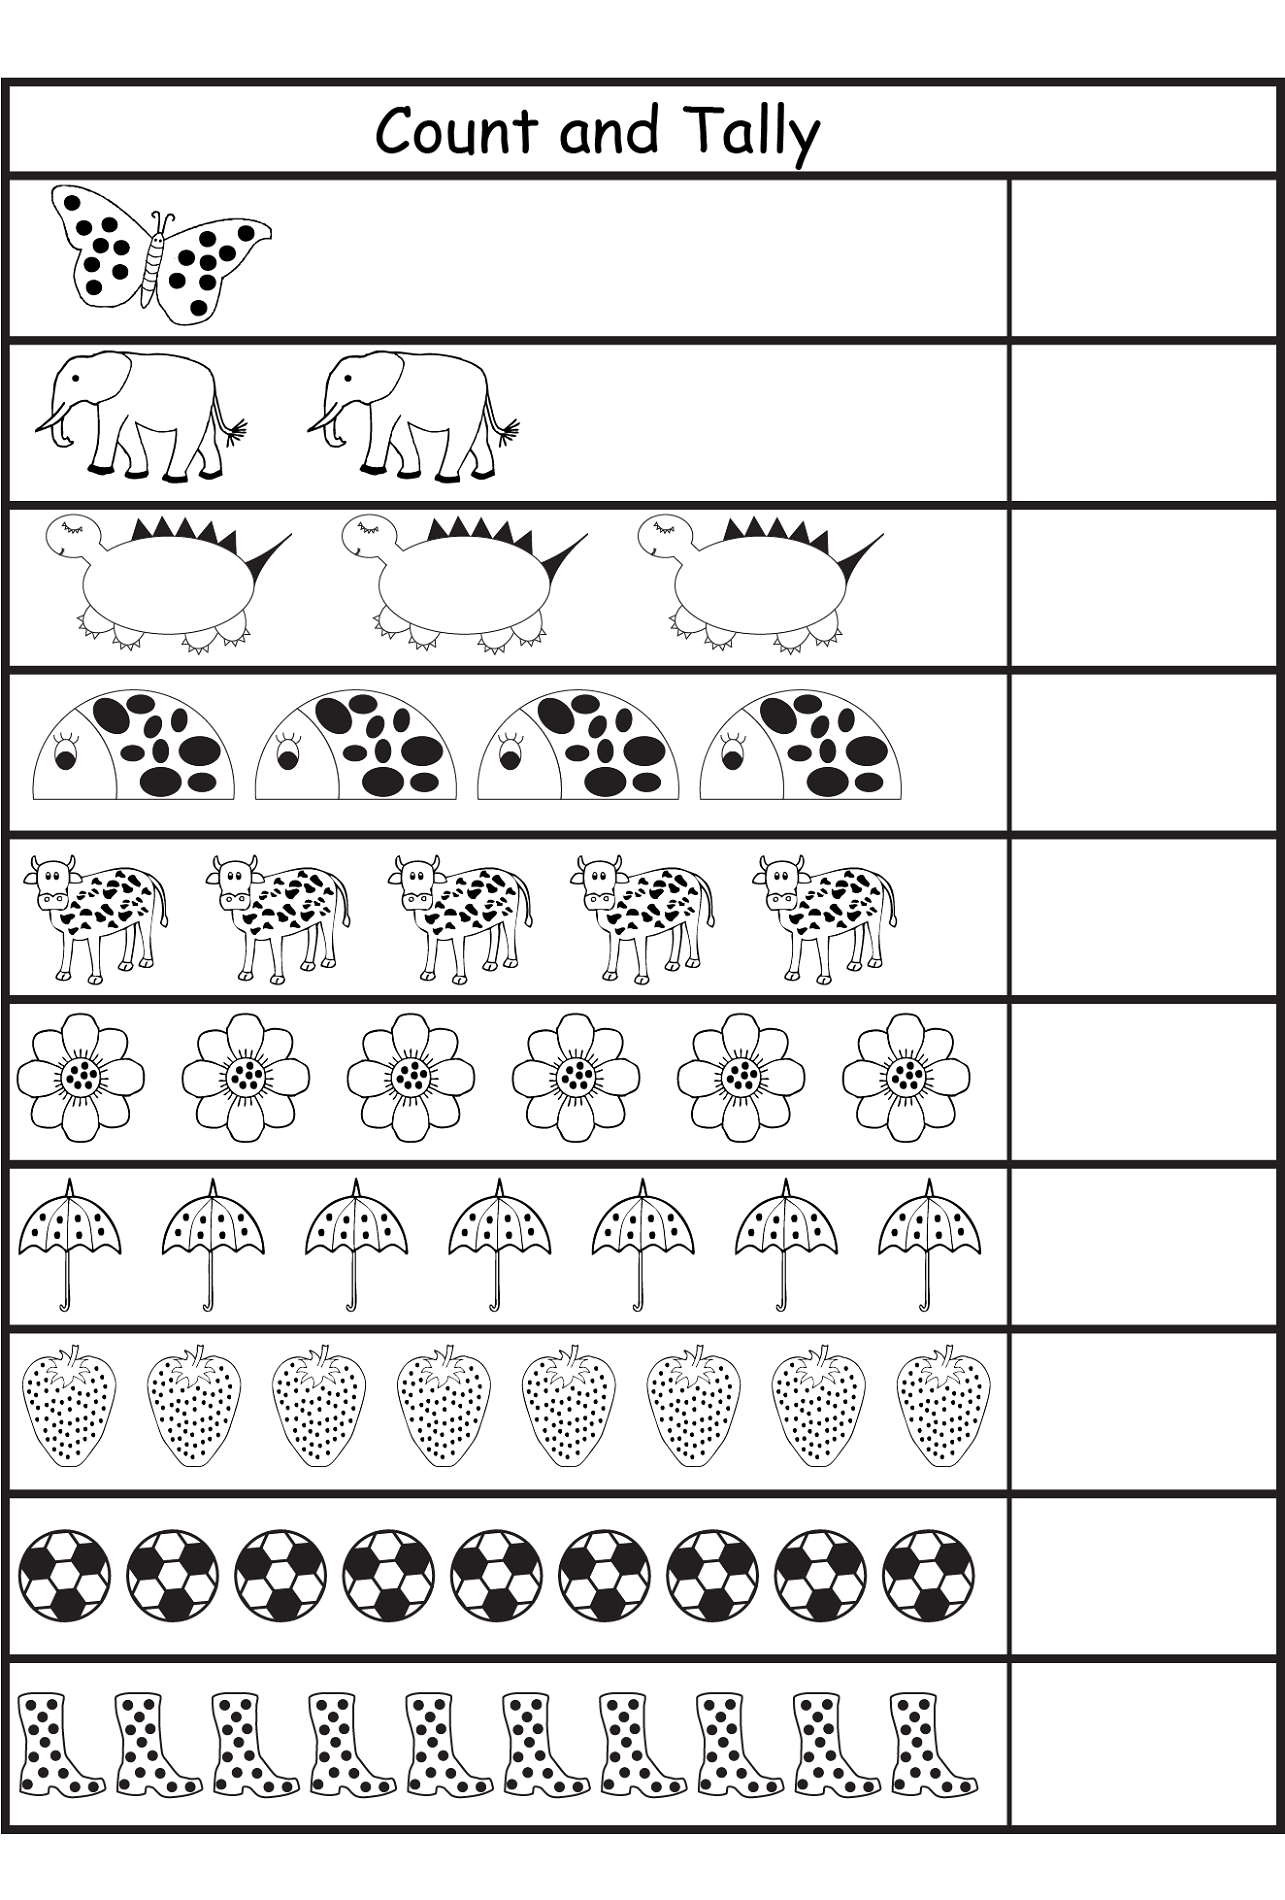 tally-chart-worksheets-for-kids-activity-shelter